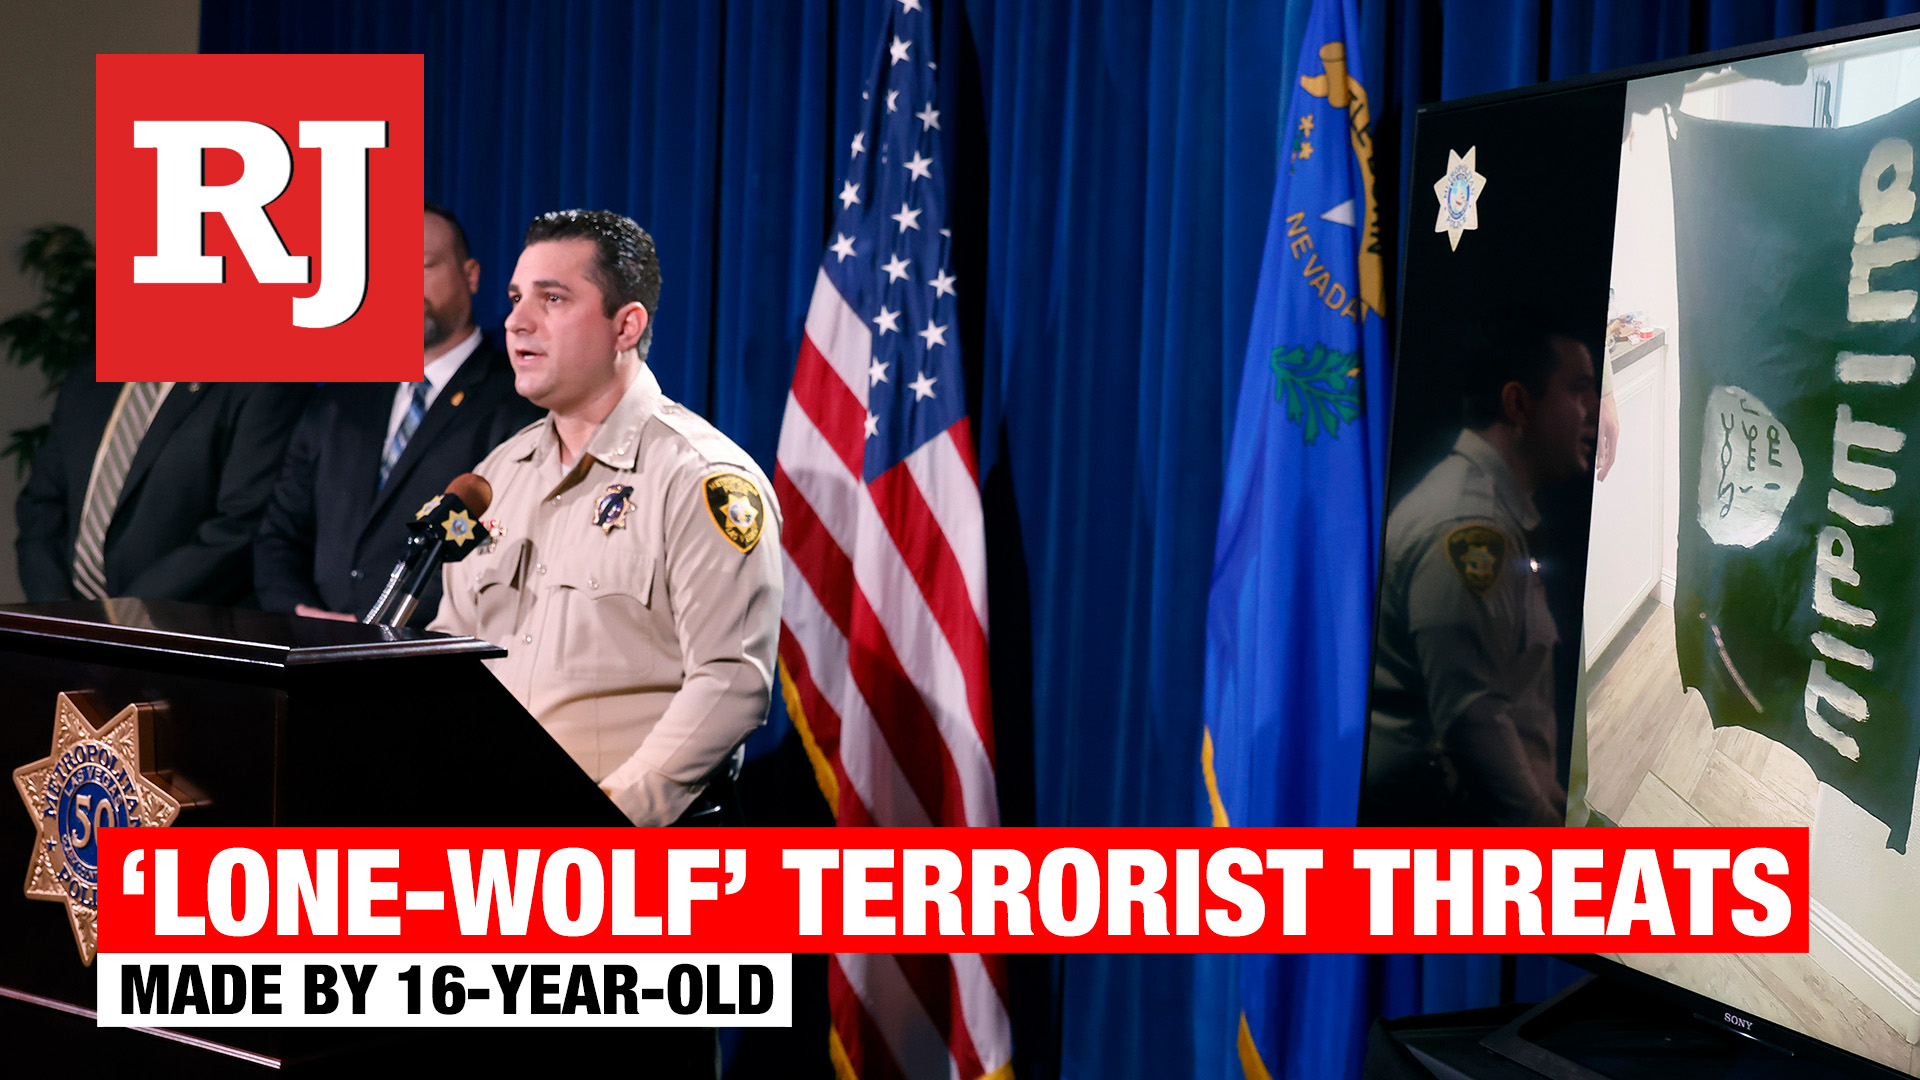 Lone-wolf’ terrorist threats made by 16-year-old